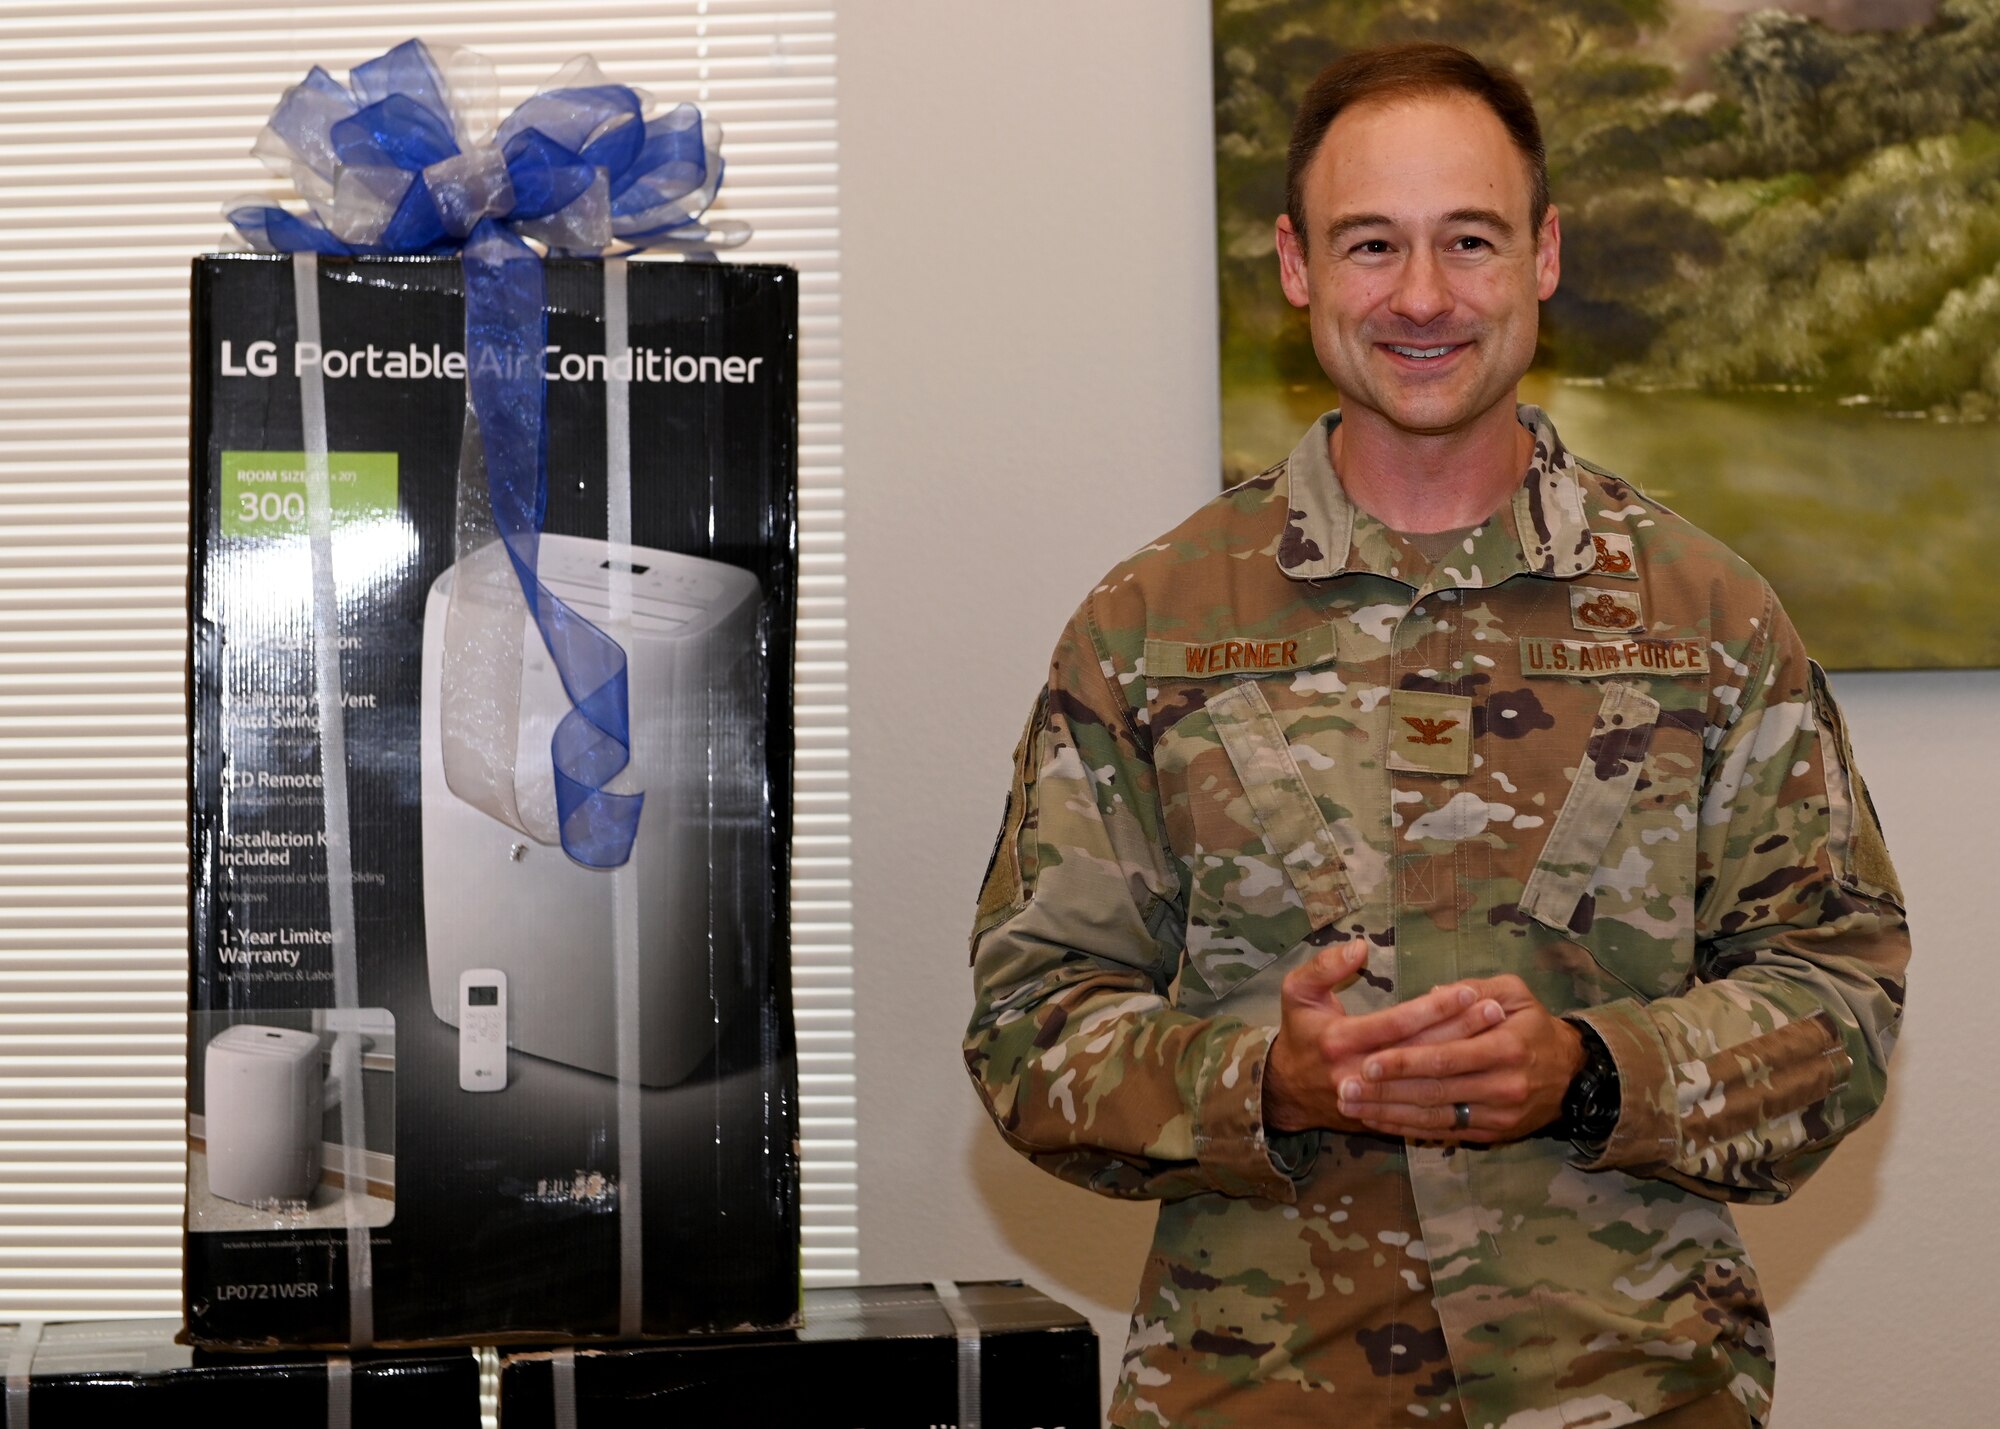 Colonel Daniel Werner, 10th Air Base Wing vice commander, stands in front of three air conditioning units recently donated to the U.S. Air Force Academy as part of quality of life improvements.